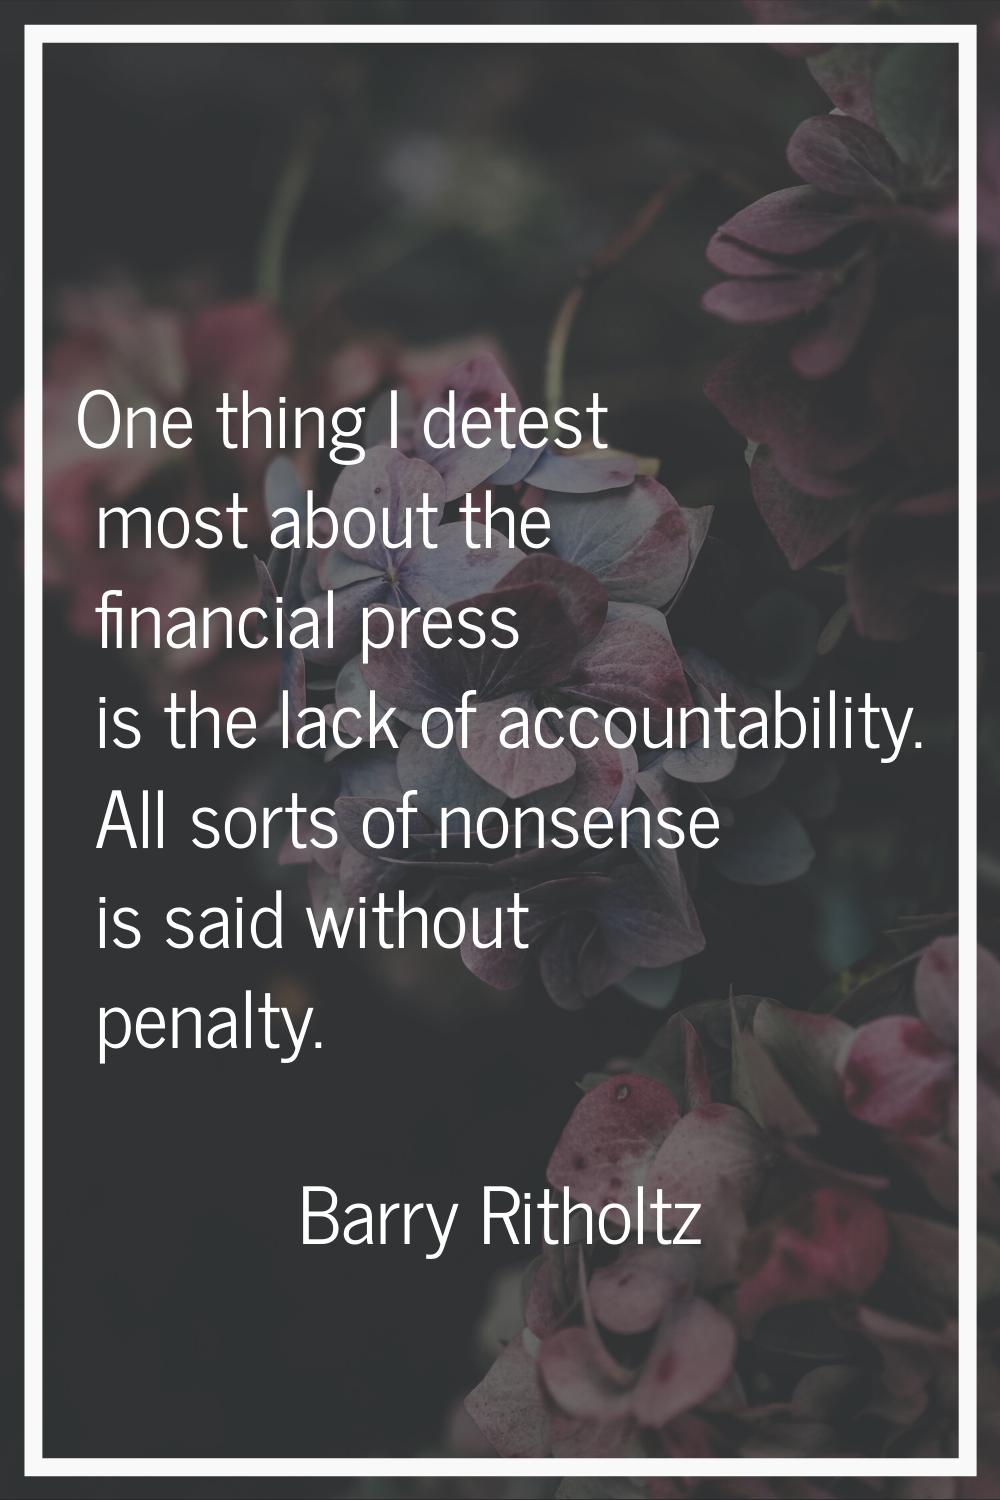 One thing I detest most about the financial press is the lack of accountability. All sorts of nonse